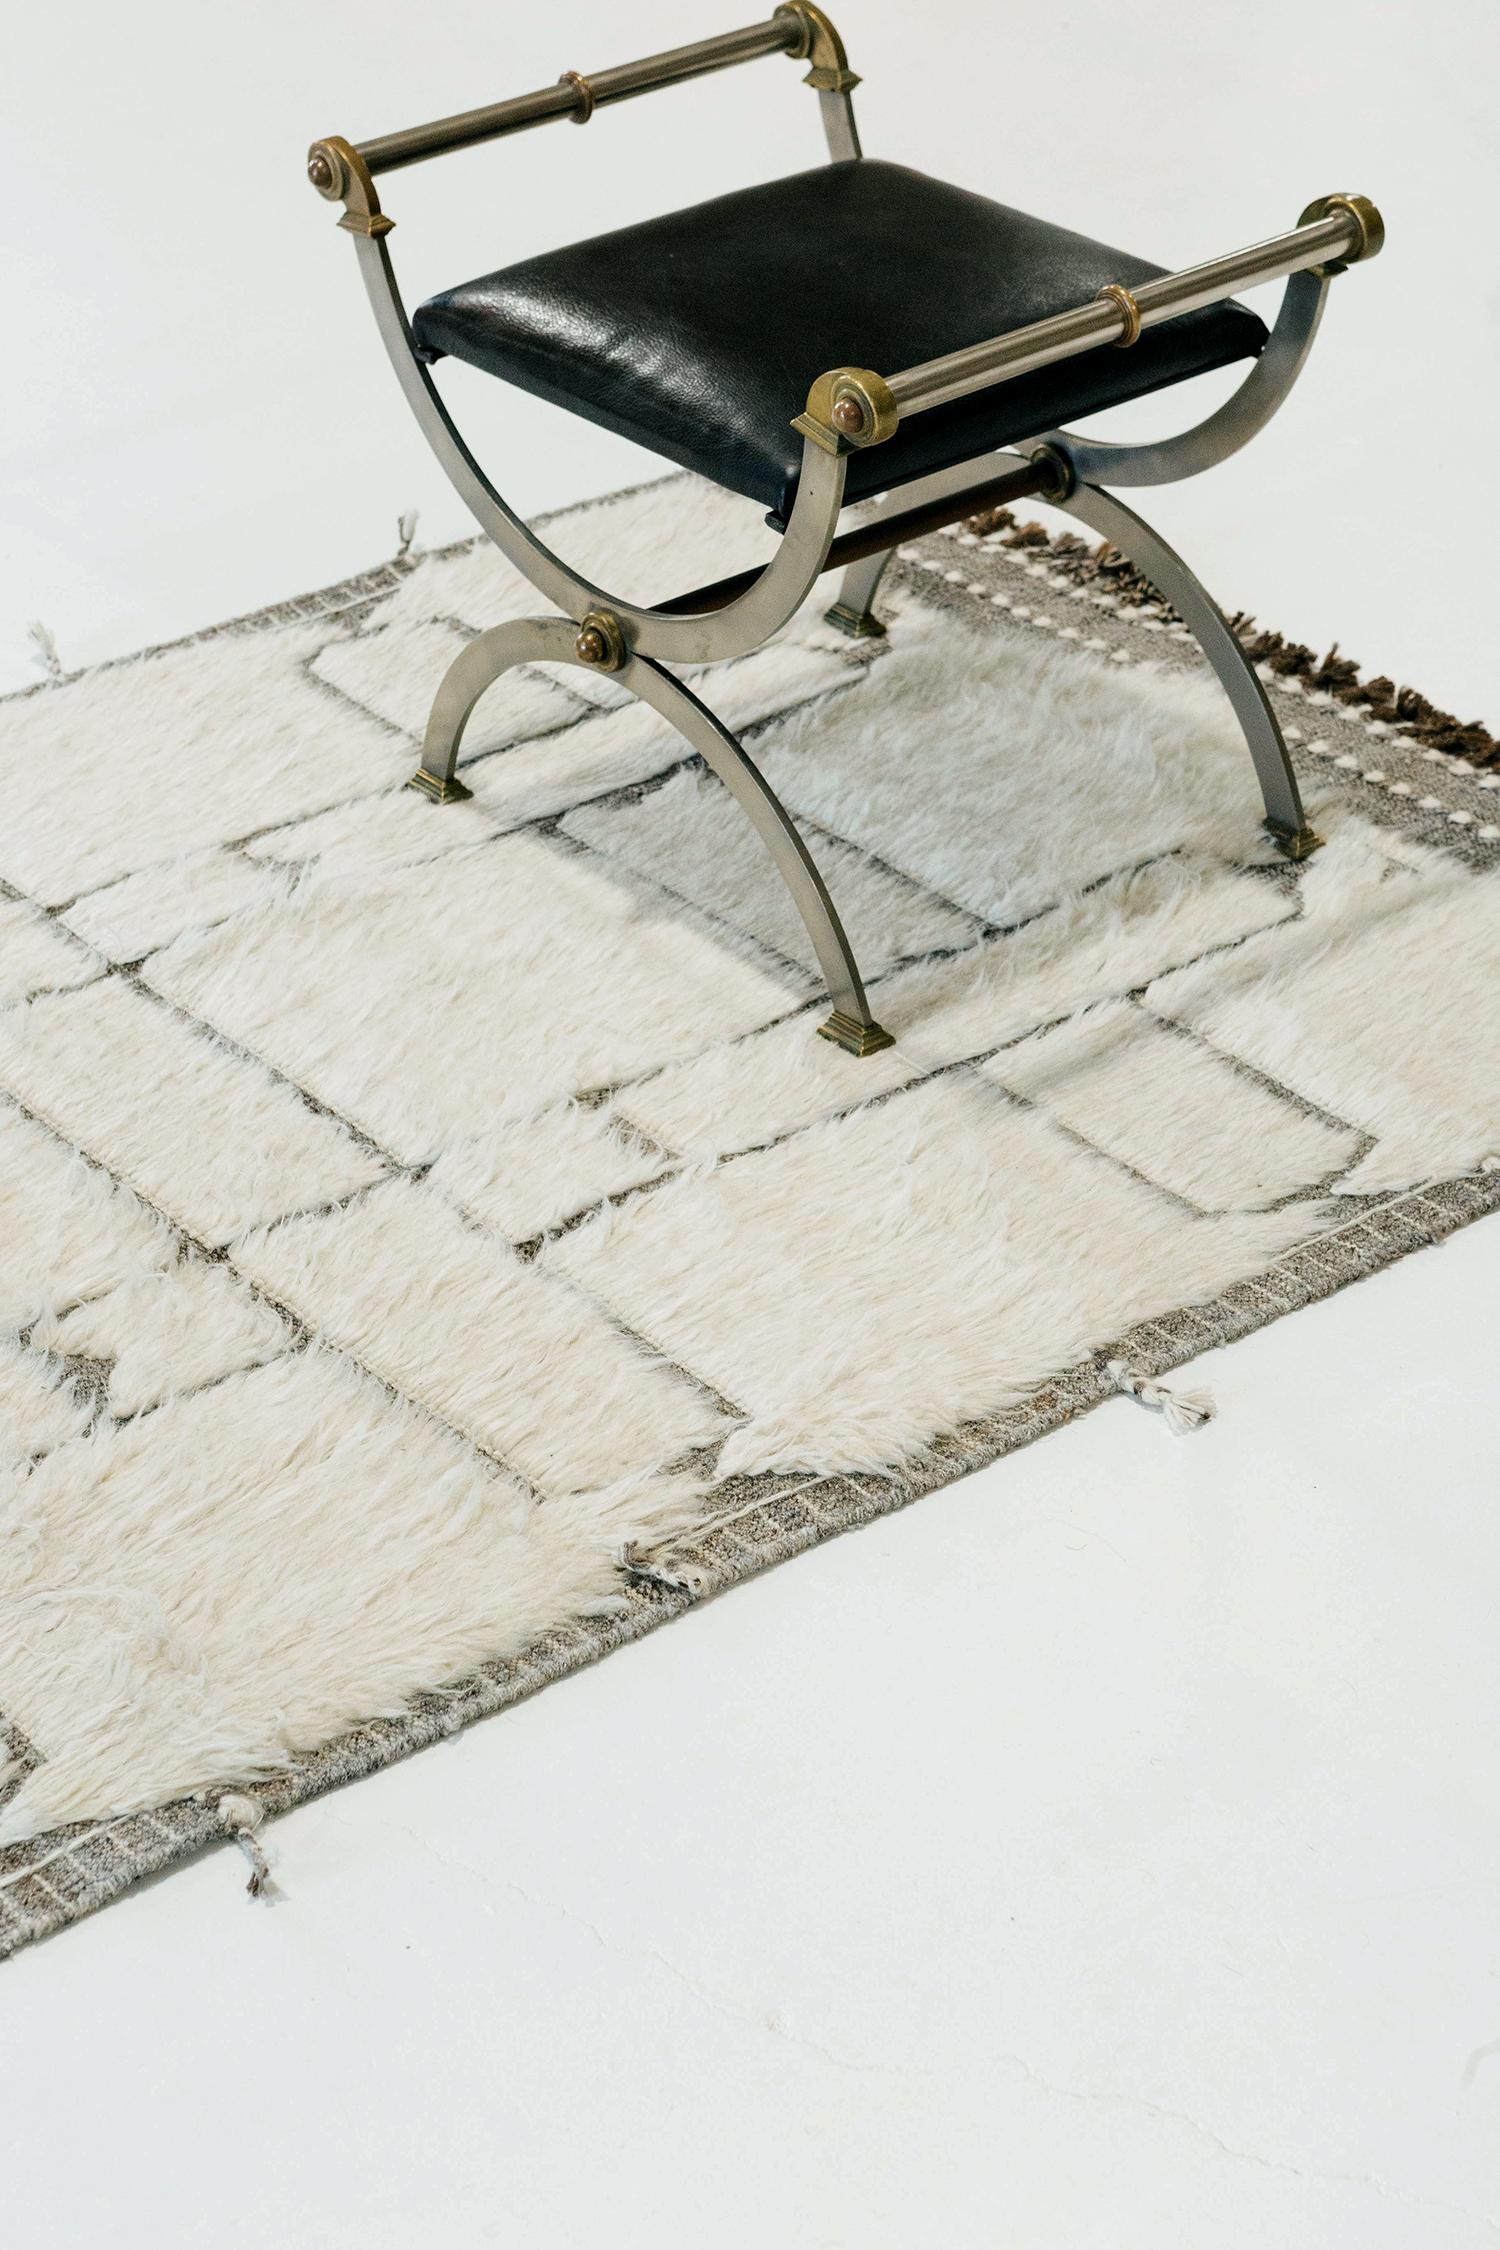 Essaouina' is a beautifully textured rug with embossed designs inspired from the Atlas Mountains of Morocco. Natural gray motifs surrounded by ivory shag and tasseled borders make for a great contemporary interpretation for the modern design world.